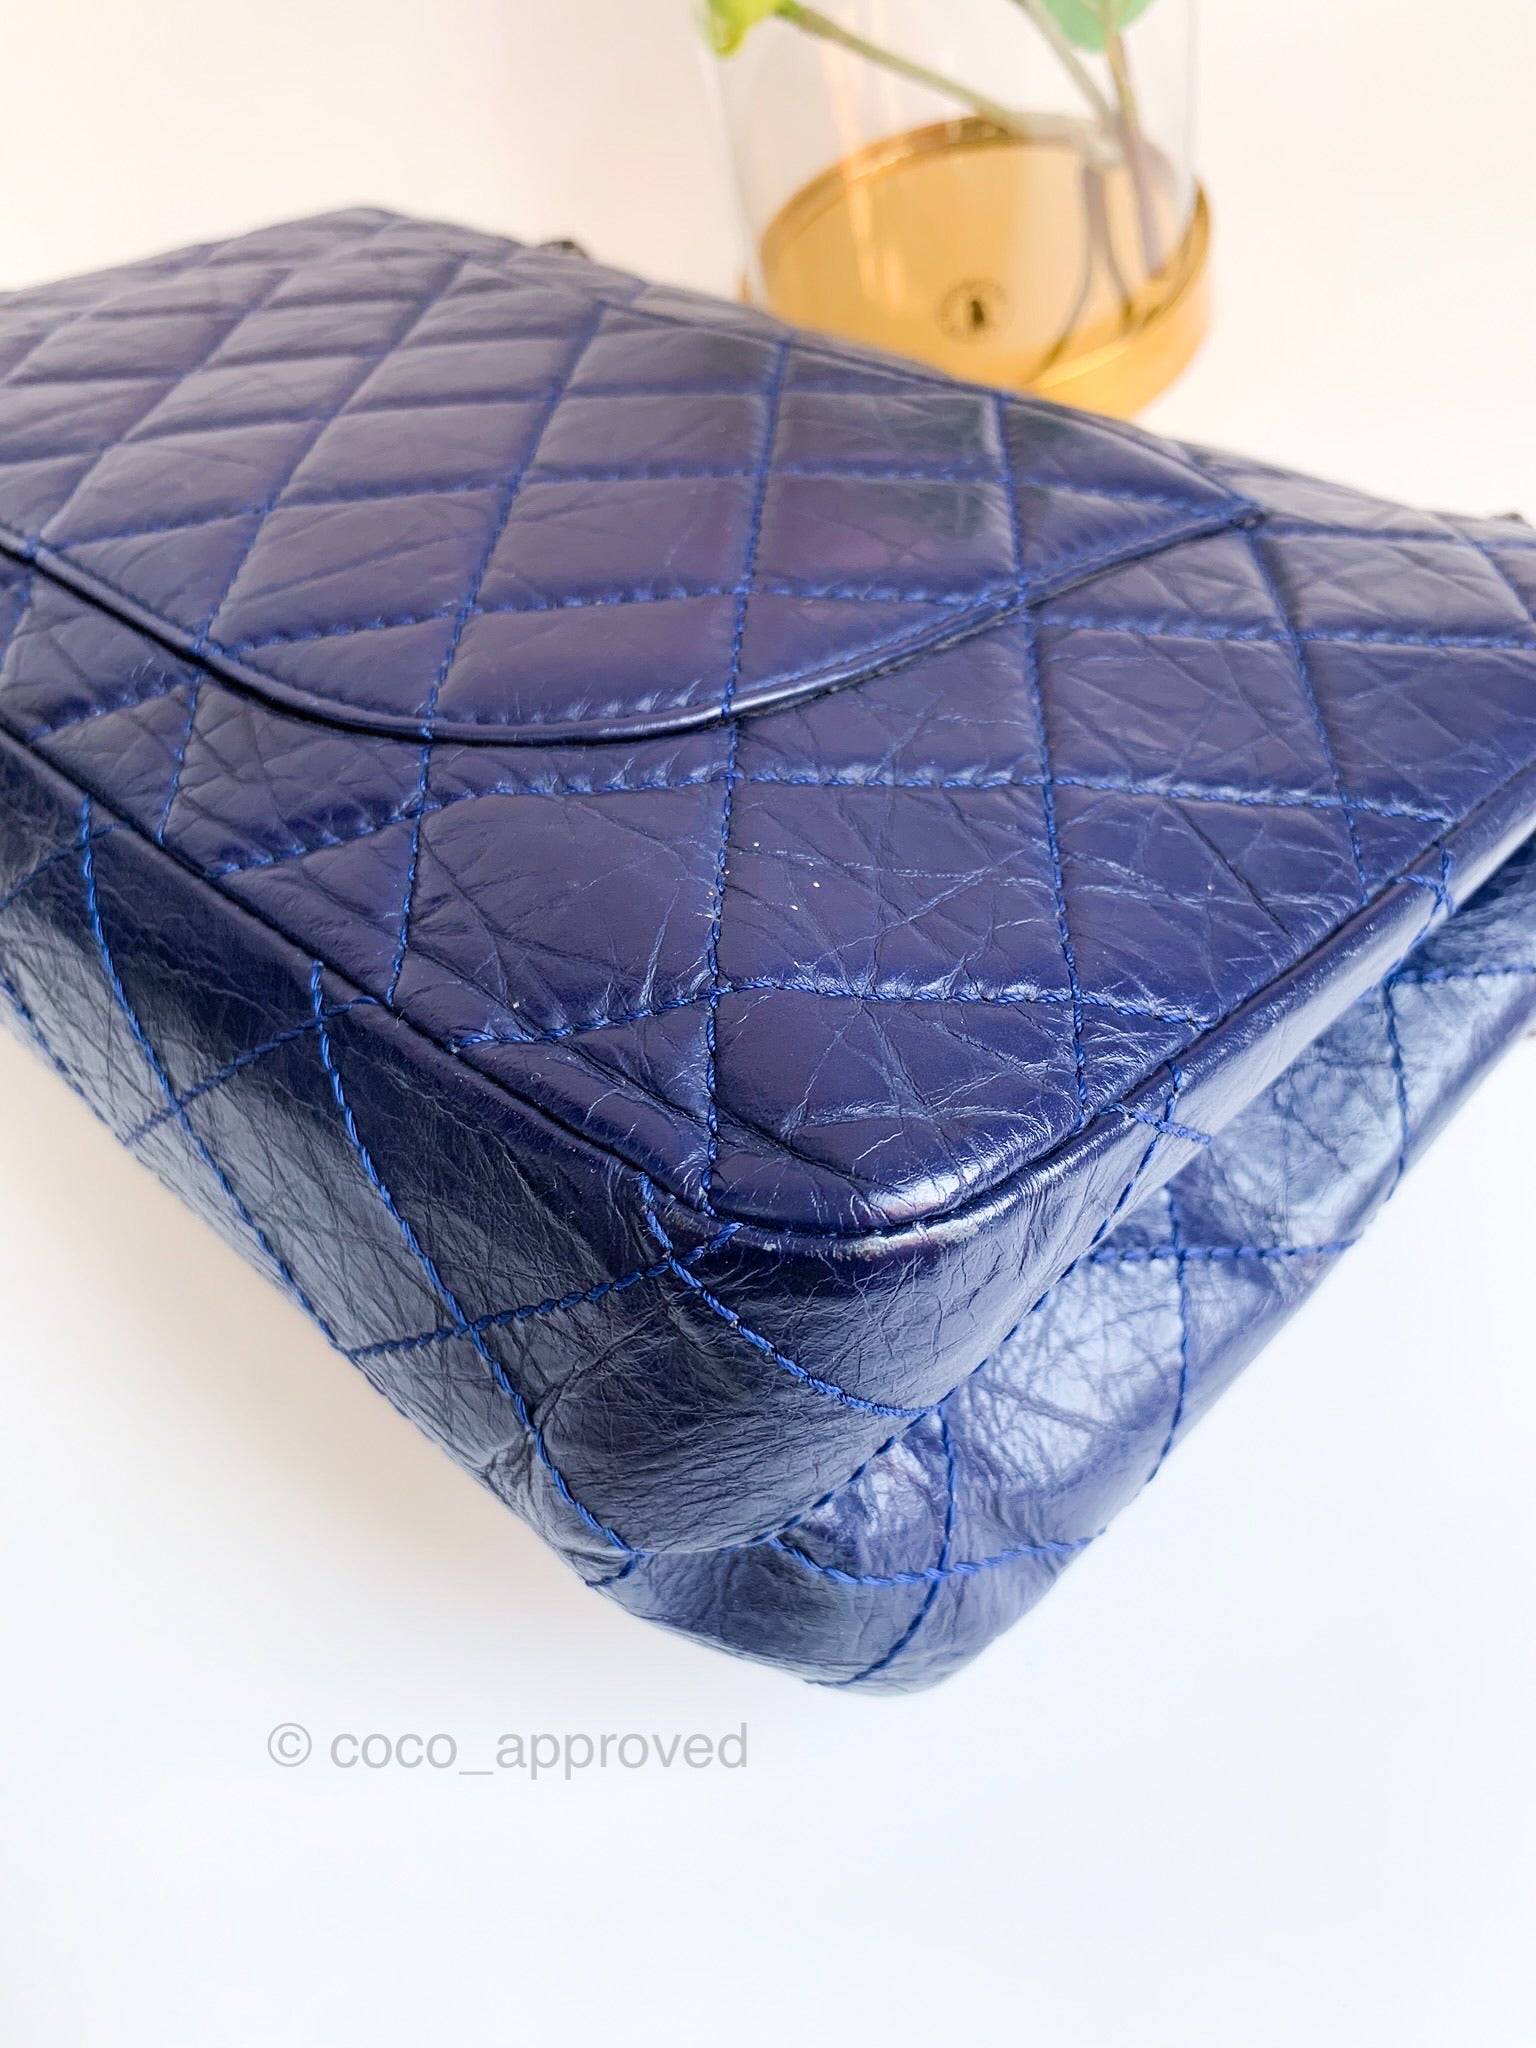 Chanel Navy Quilted Distressed Calfskin Chain Flap - Ann's